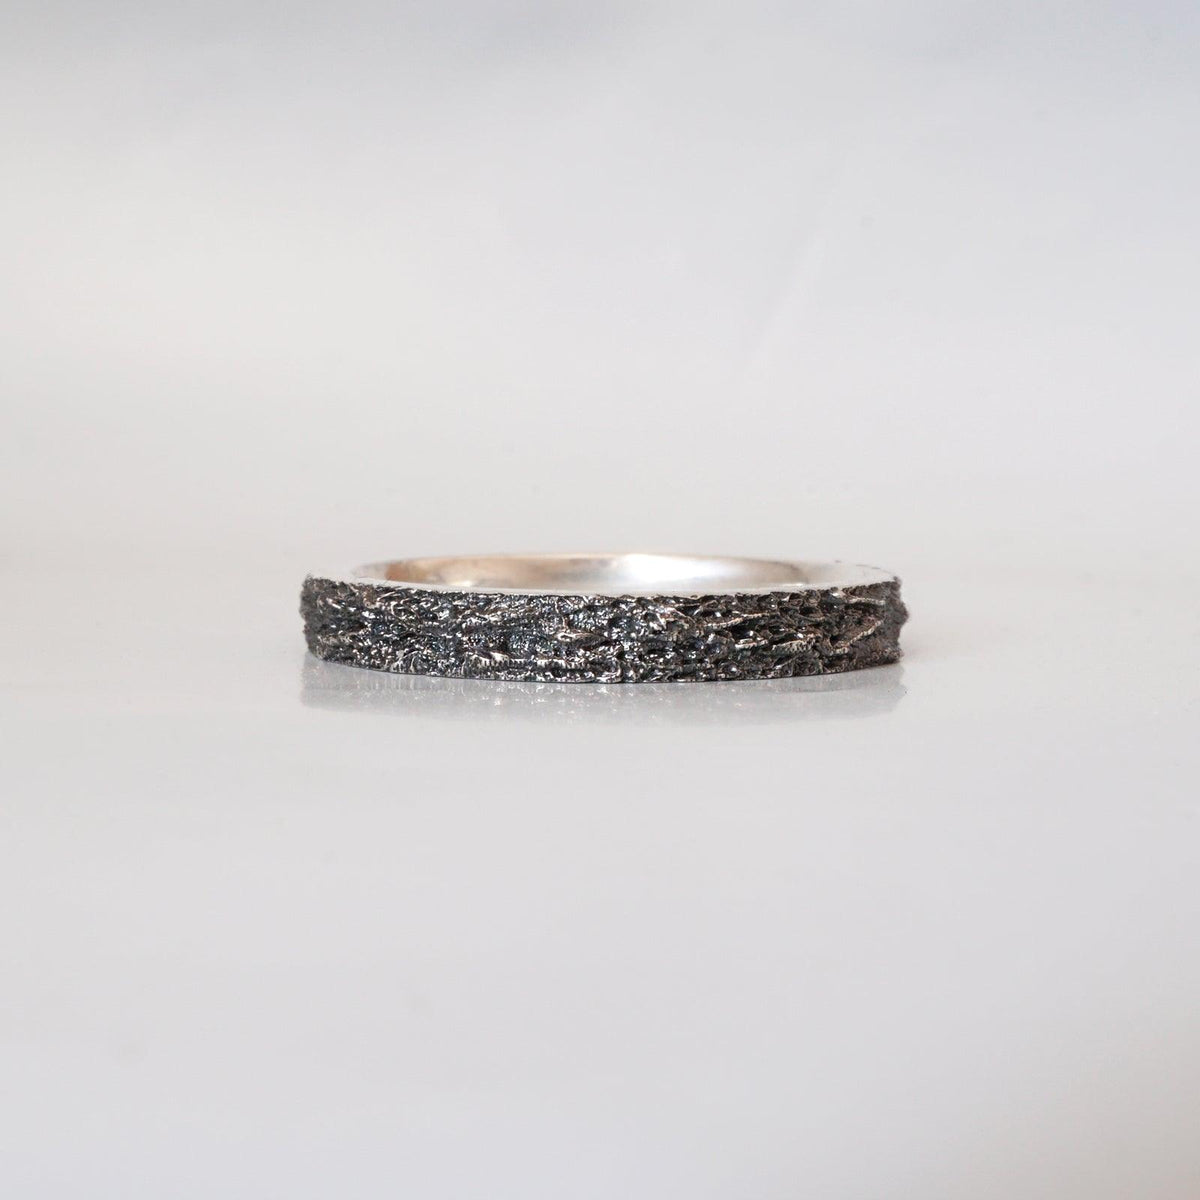 Oxidized Meteoroid Ring Band in Sterling Silver, 3mm